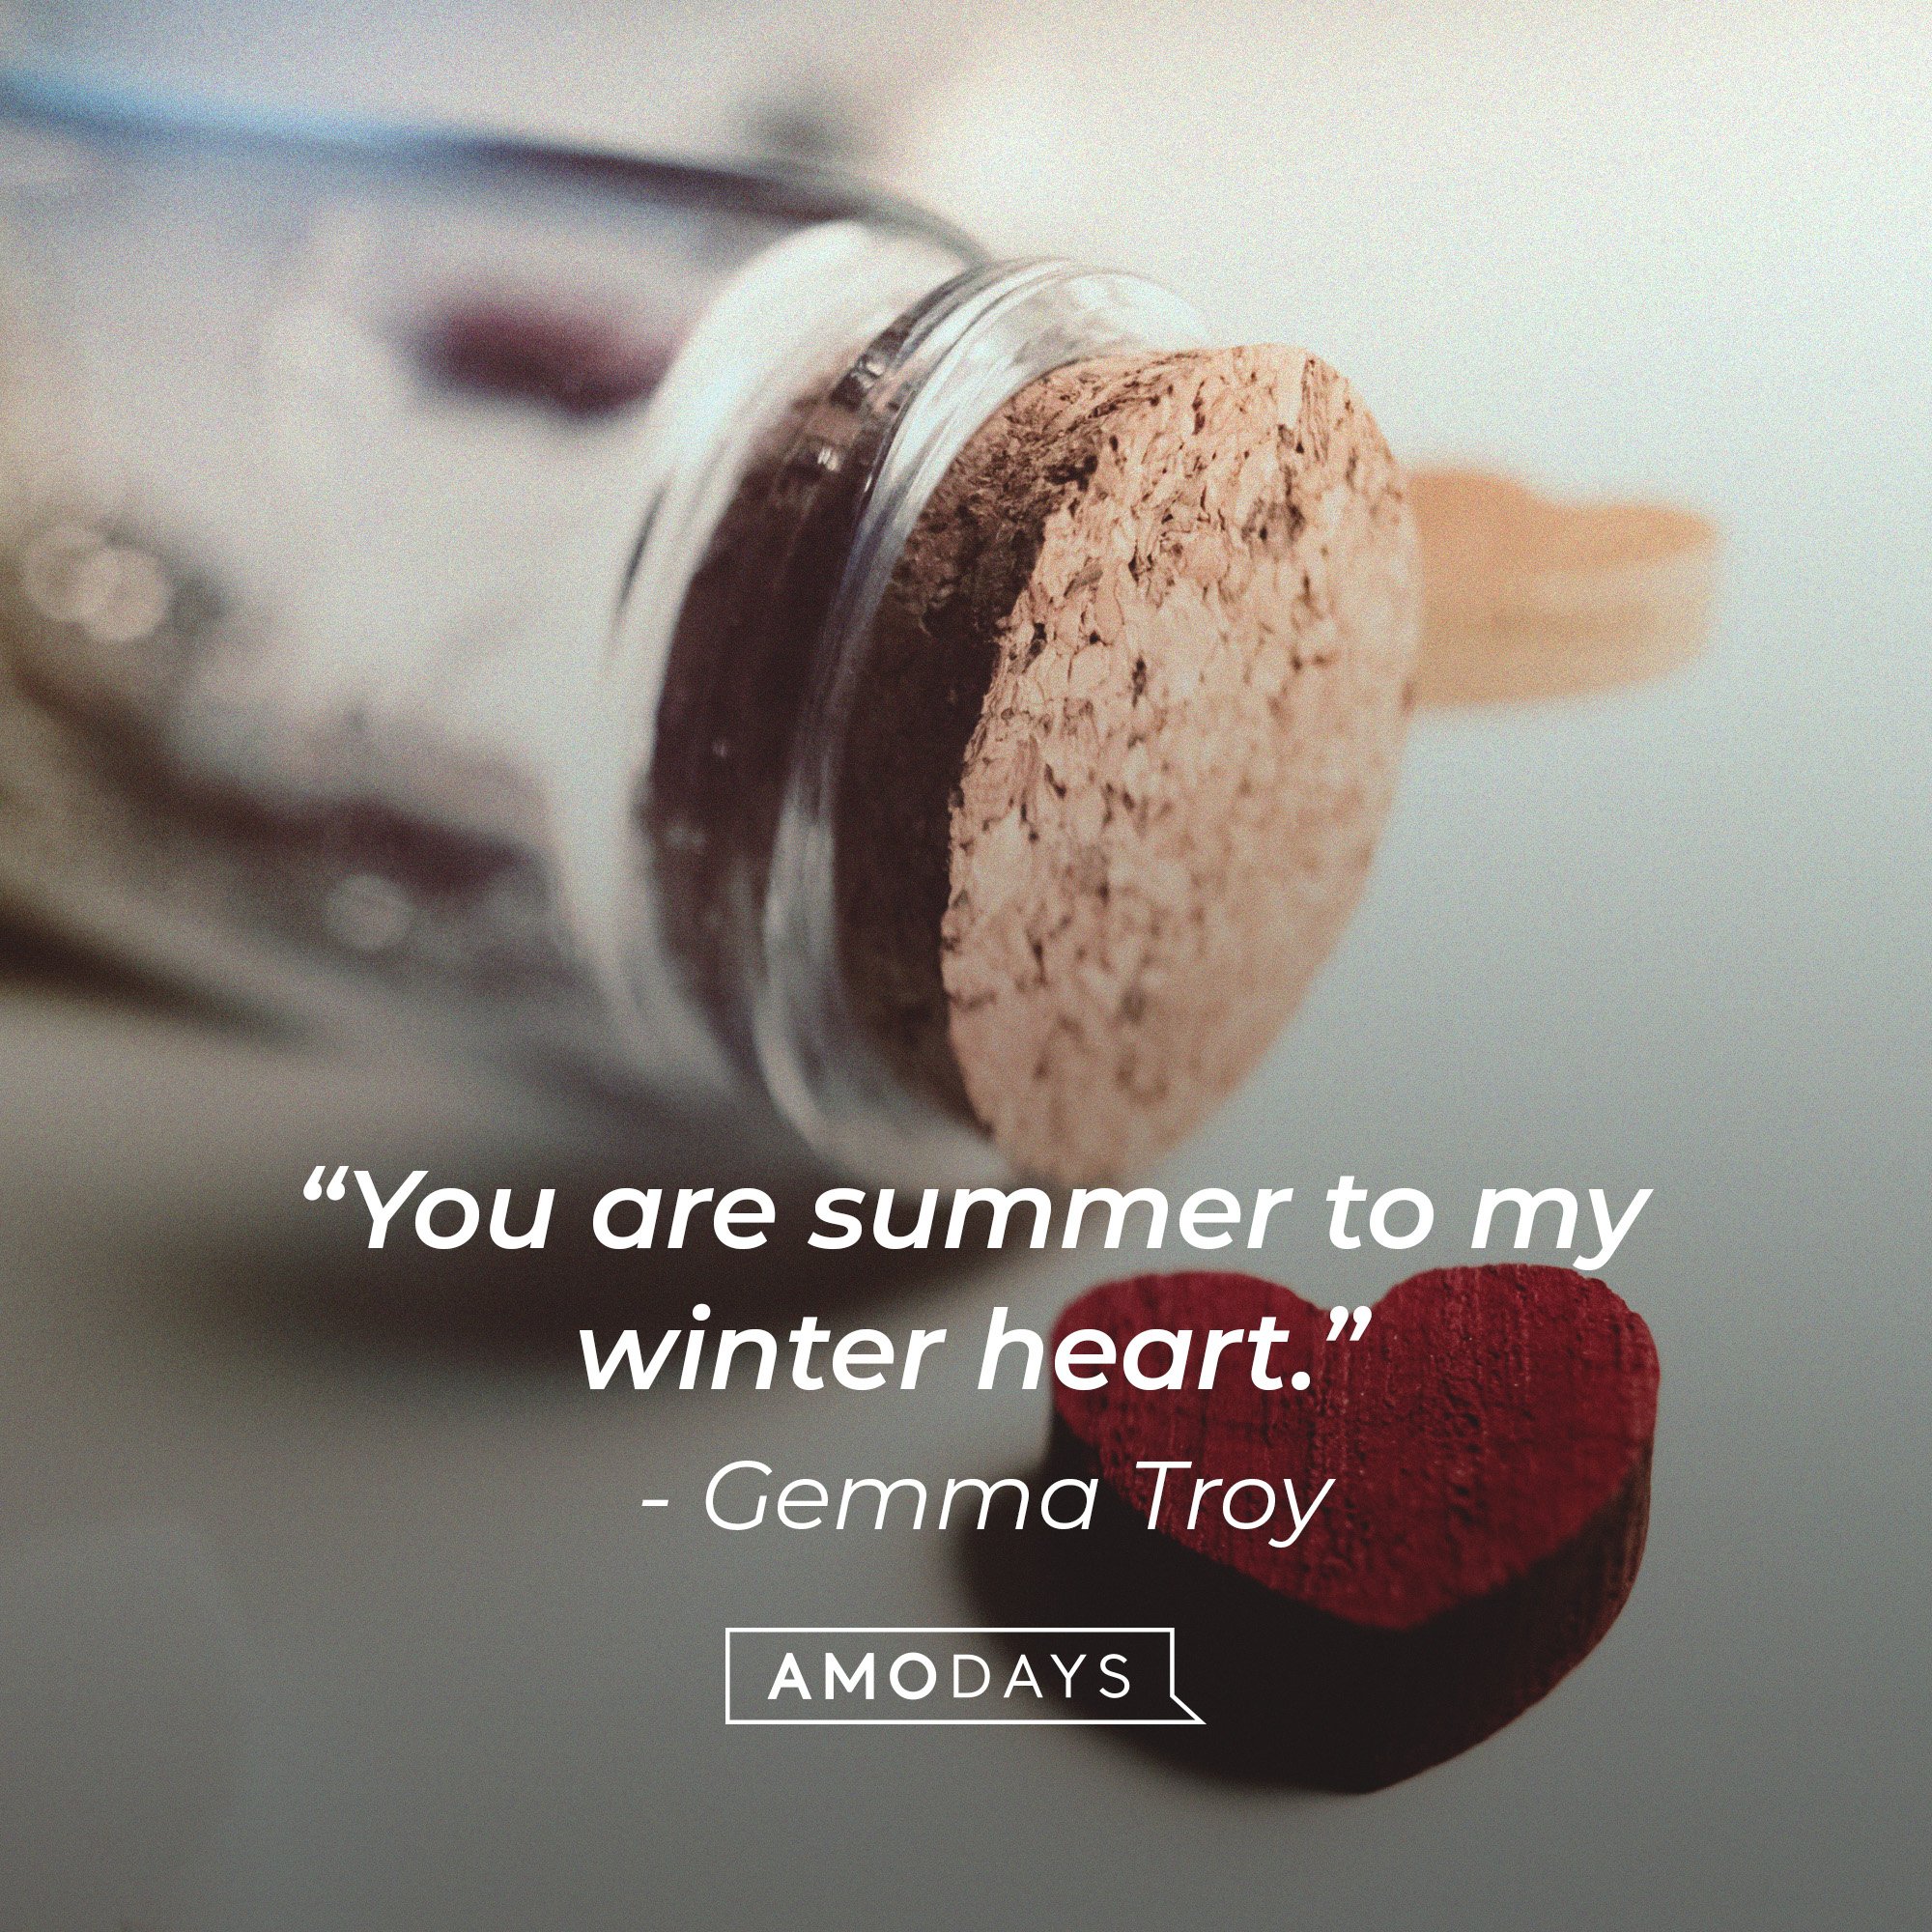 Gemma Troy's quote: “You are summer to my winter heart.” | Image: AmoDays